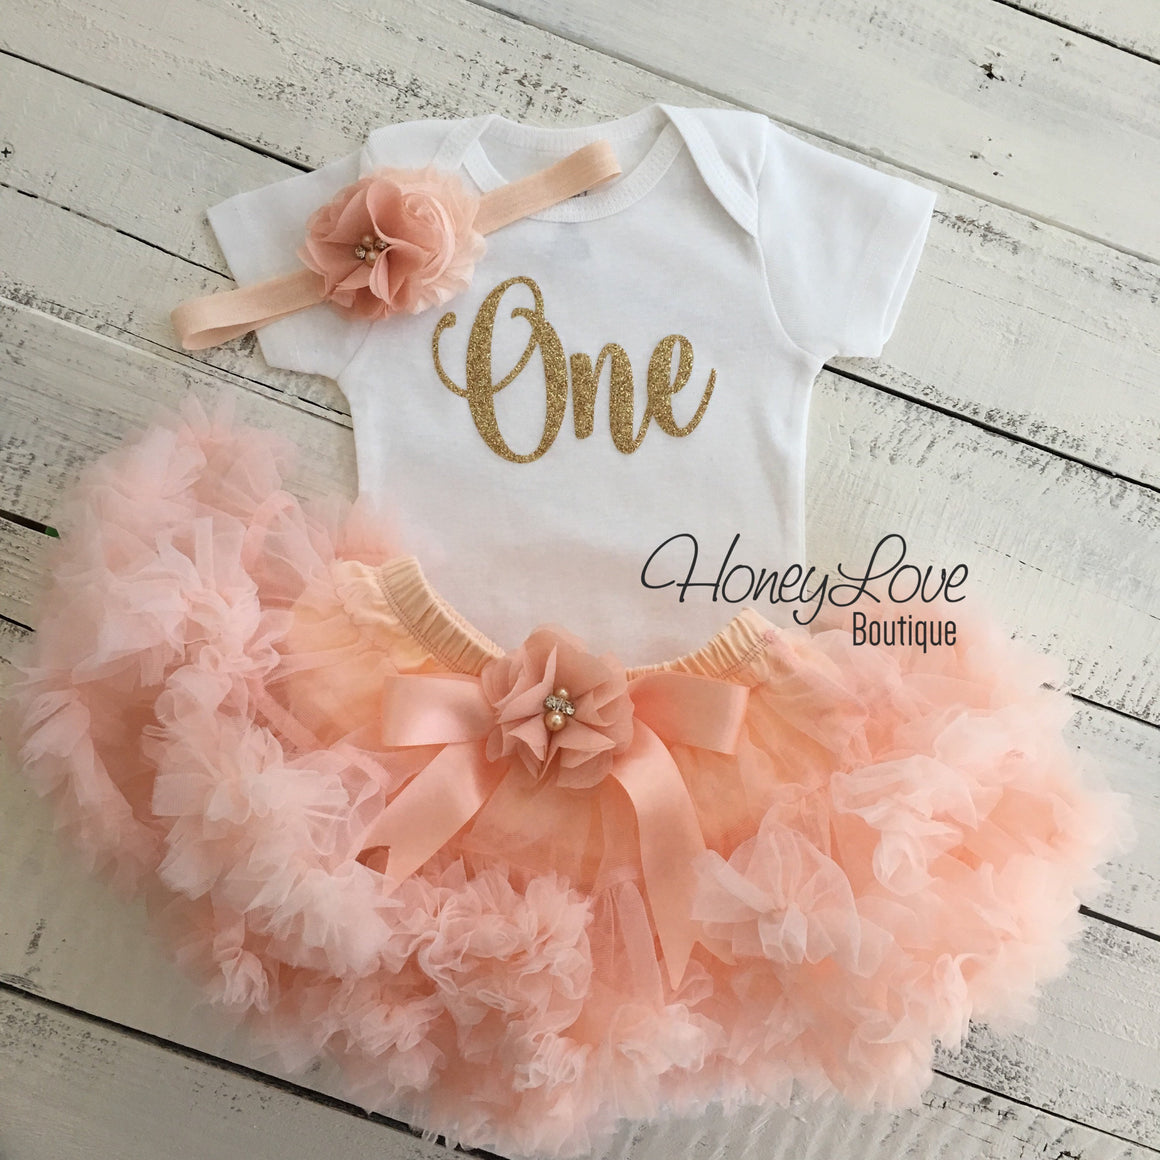 One - Birthday Outfit - Gold glitter and Peach - embellished pettiskirt - HoneyLoveBoutique